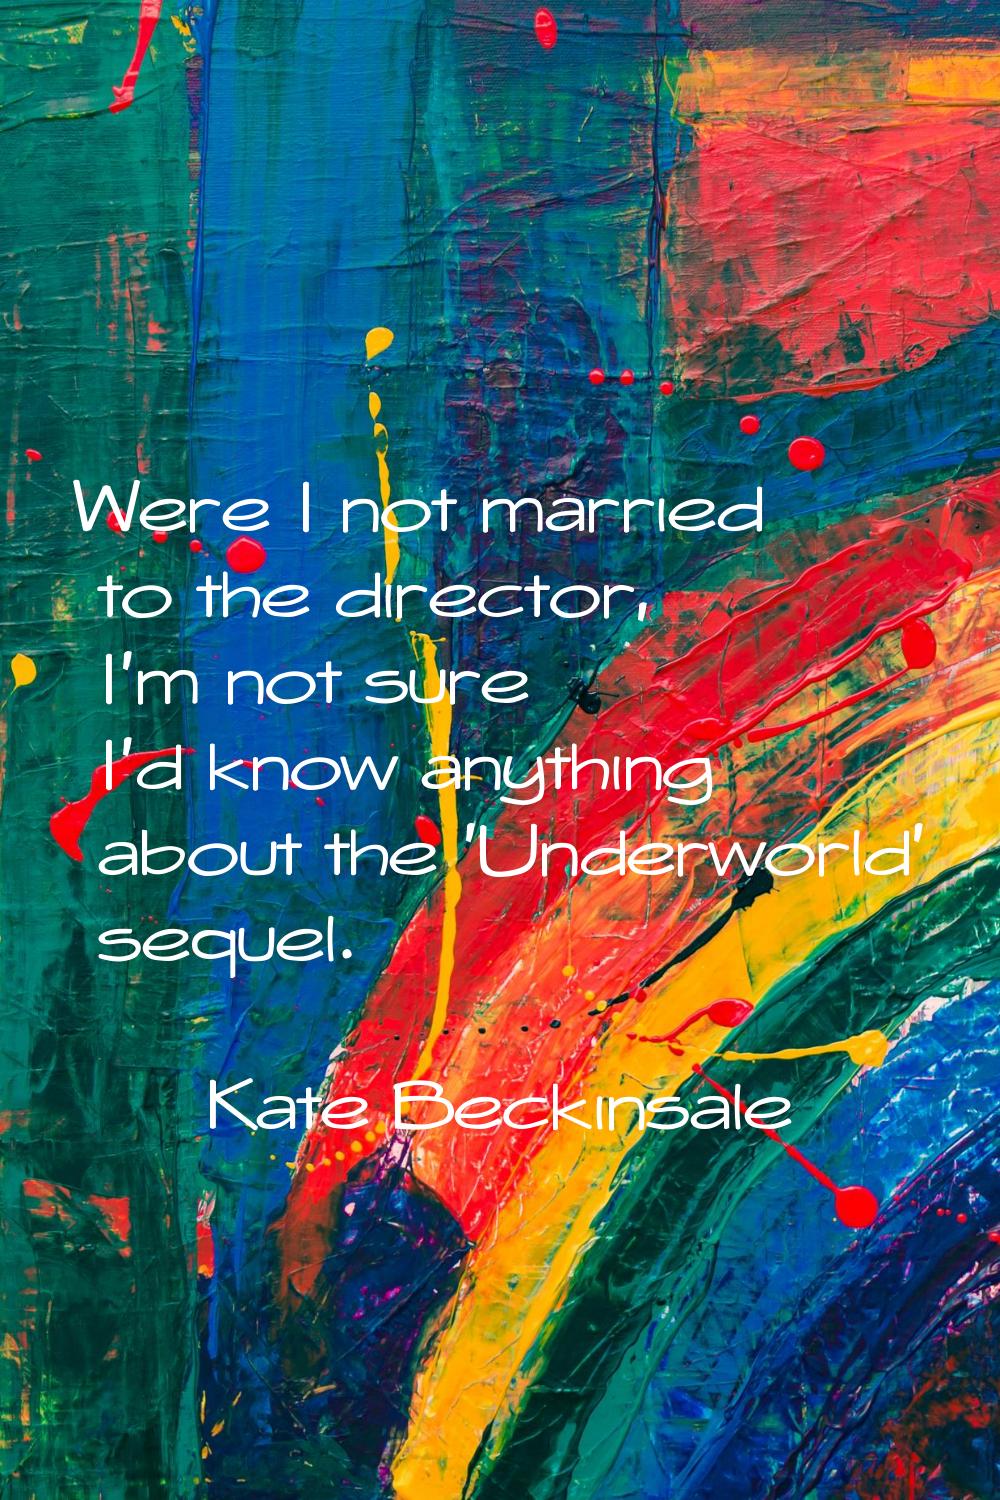 Were I not married to the director, I'm not sure I'd know anything about the 'Underworld' sequel.